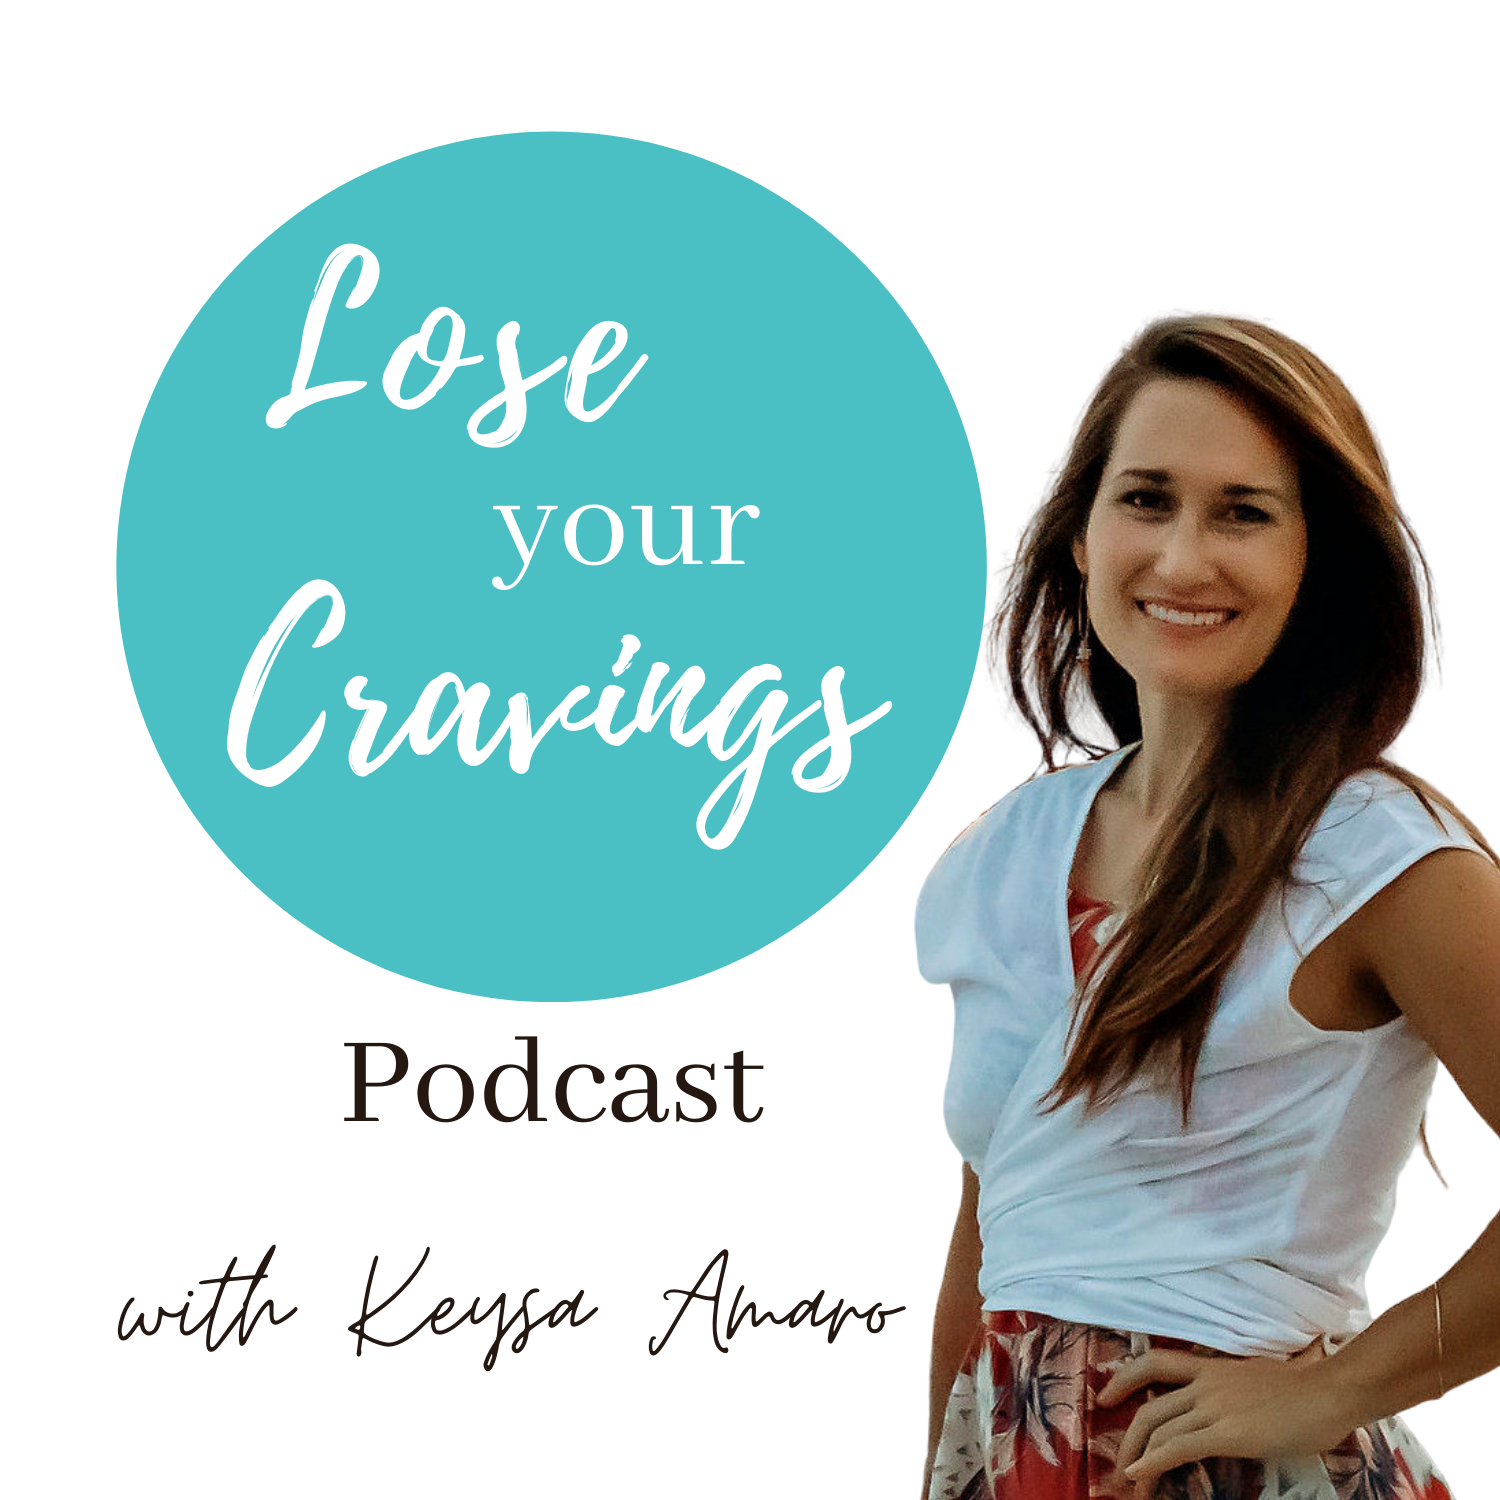 Lose Your Cravings Podcast with Keysa Amaro